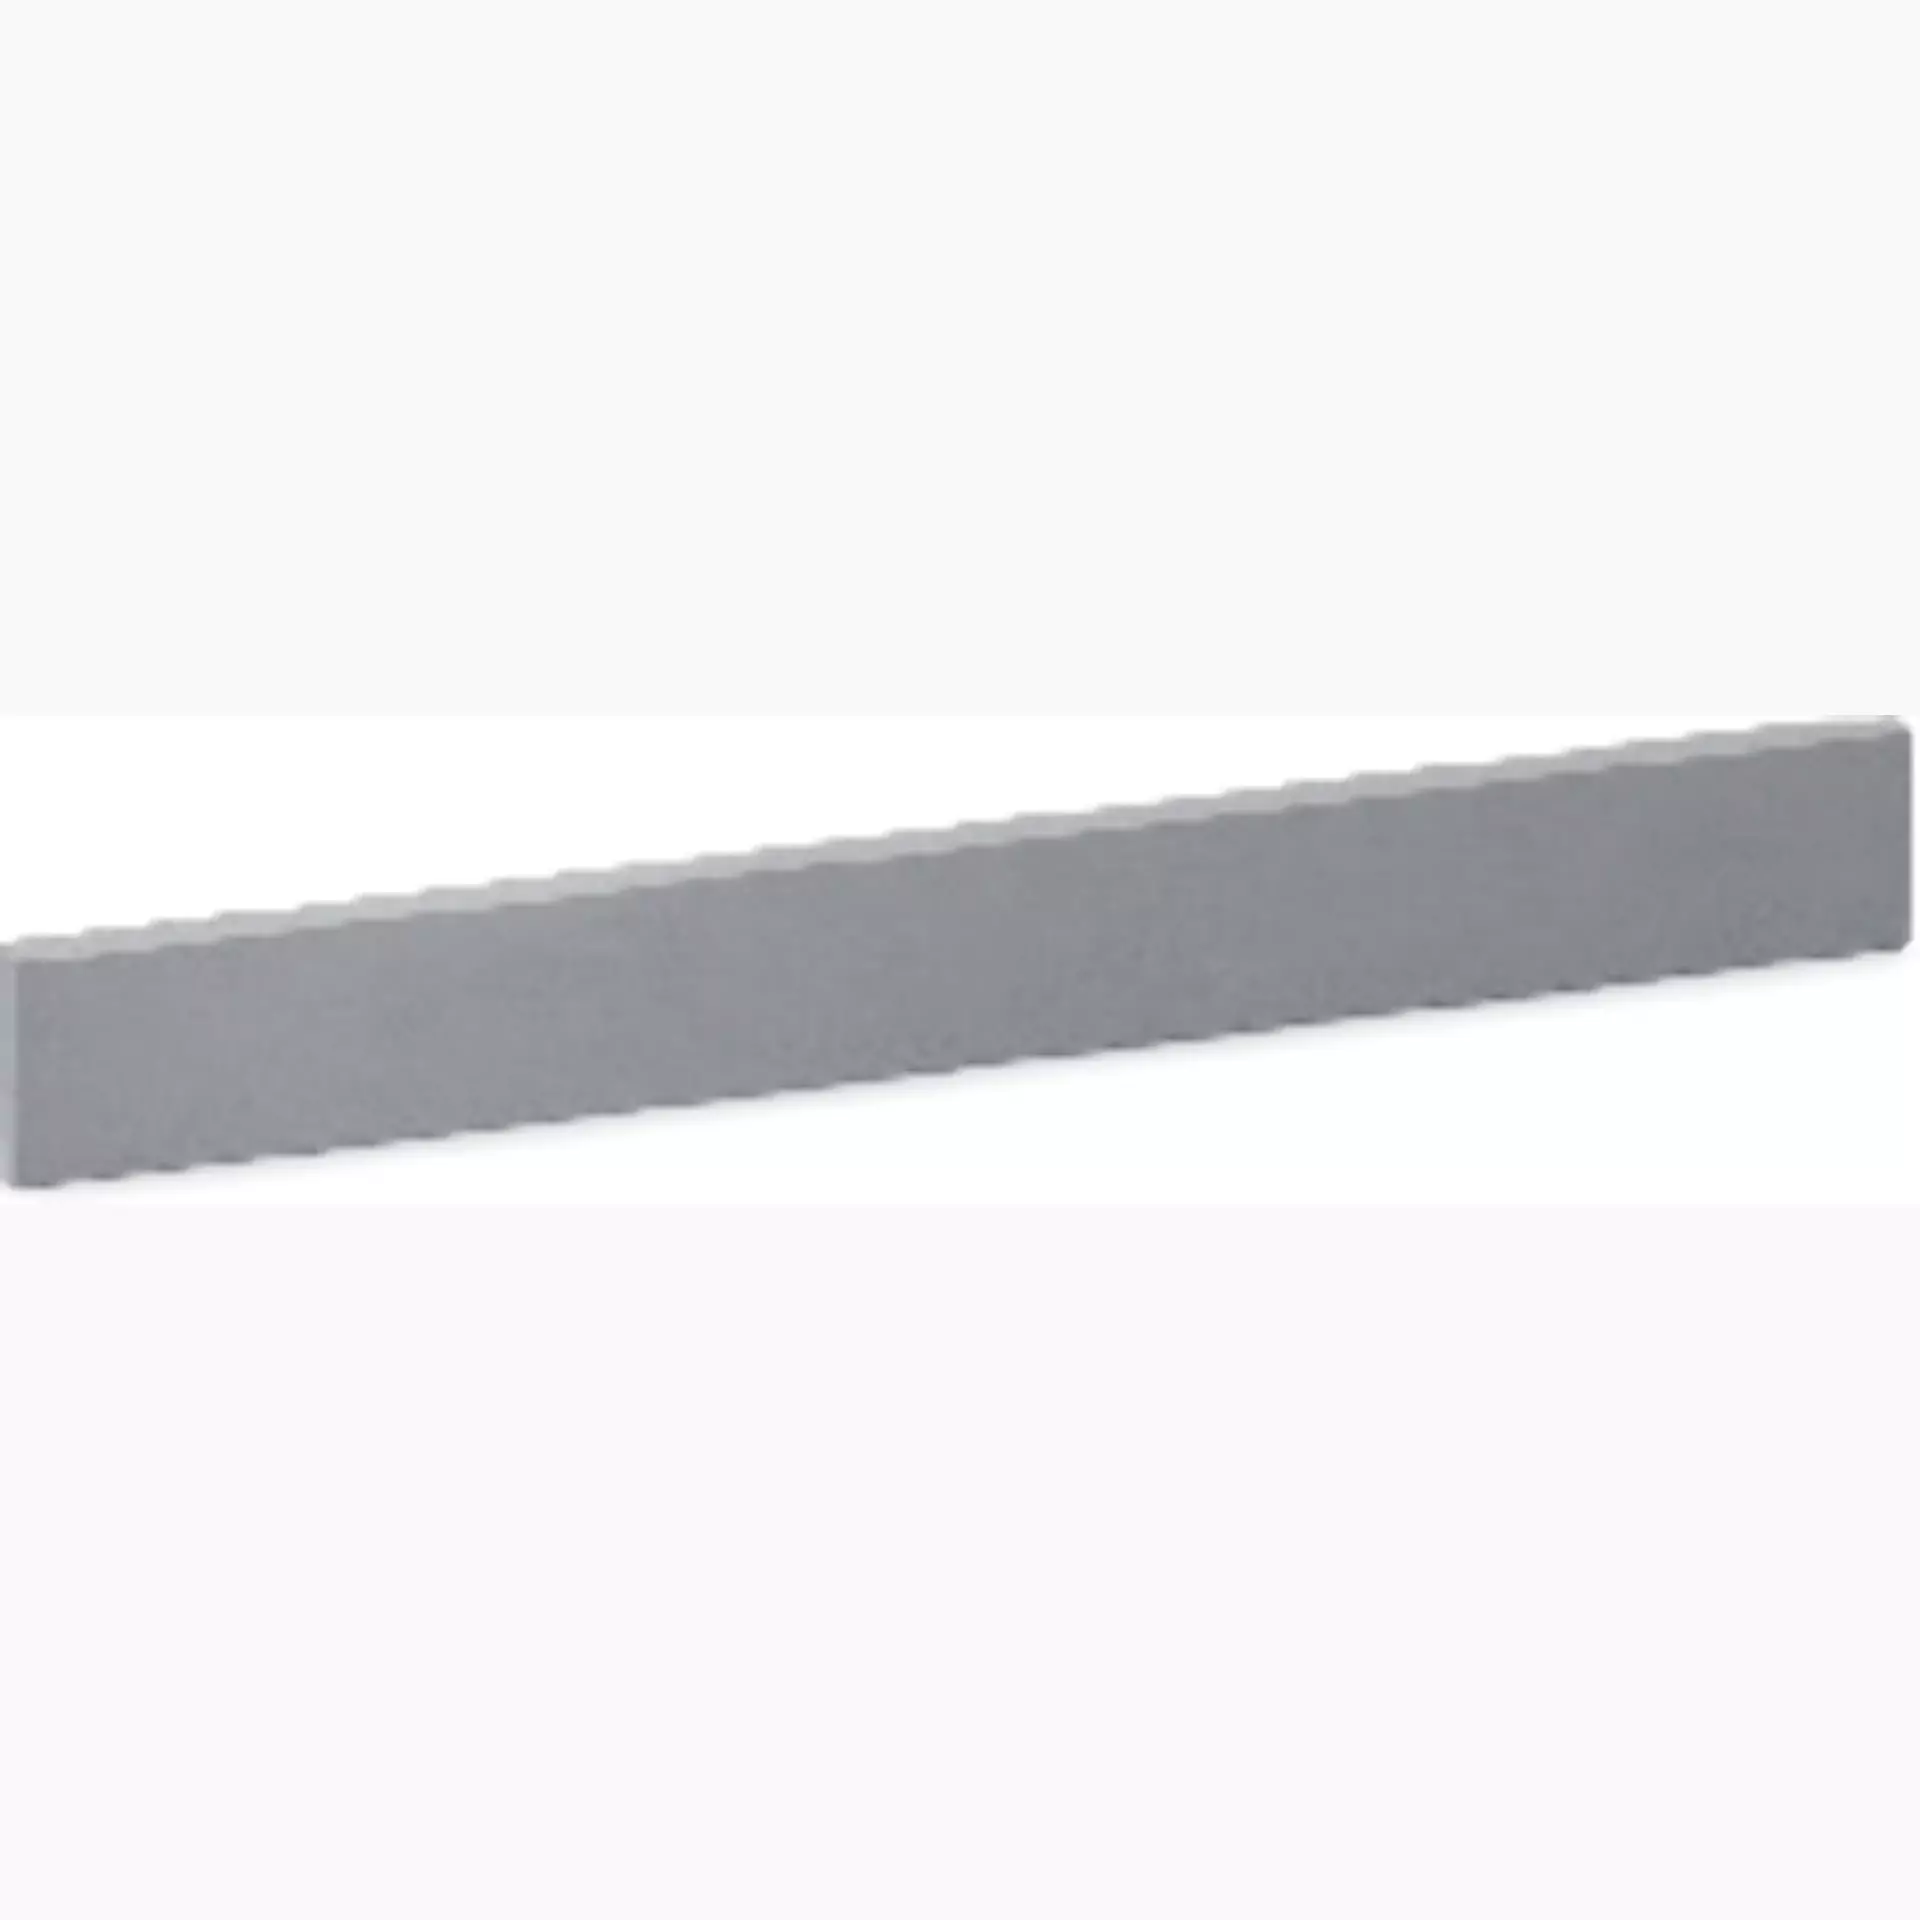 Sichenia Space Sand Skirting board 0177851 7x60cm rectified 10mm